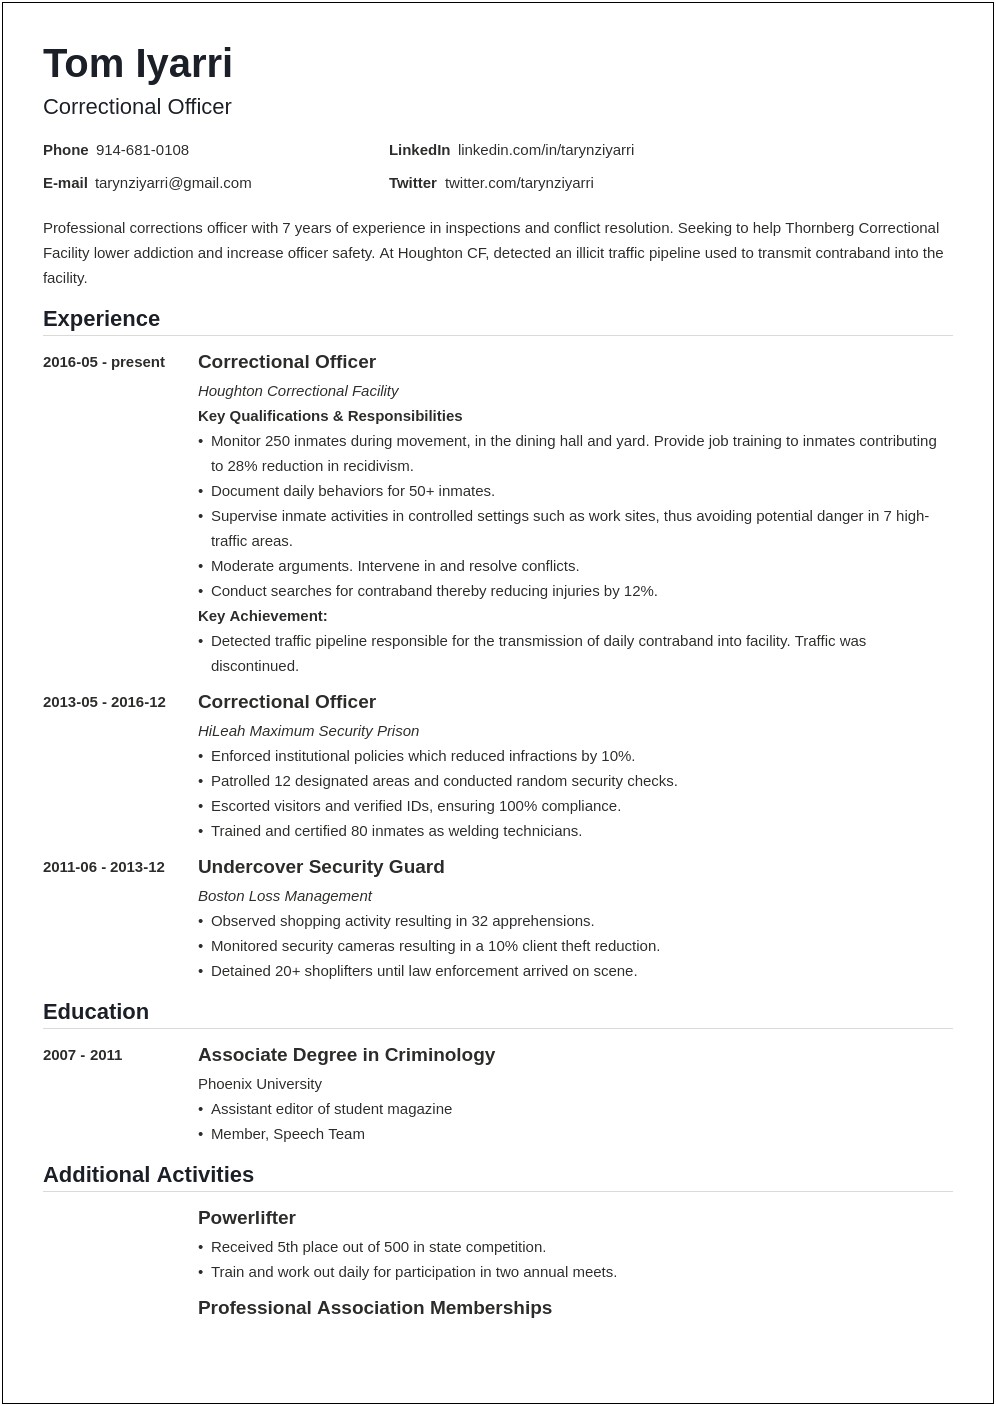 Resume Summary Examples For Corrections